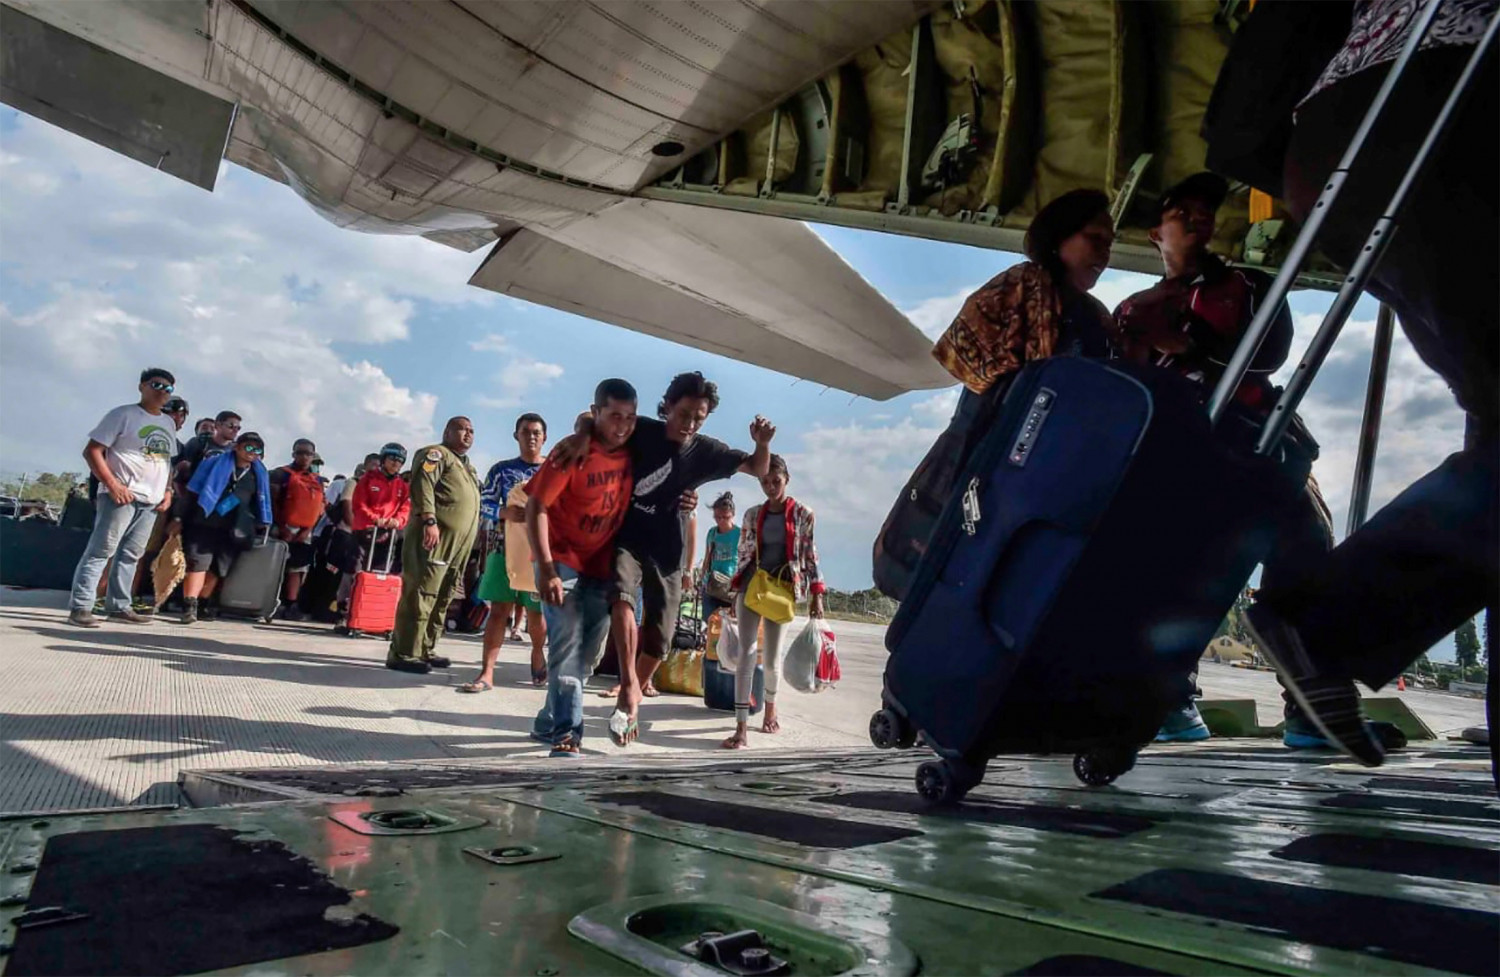 People injured or affected by the earthquake and tsunami are evacuated on an airforce plane in Palu, Central Sulawesi